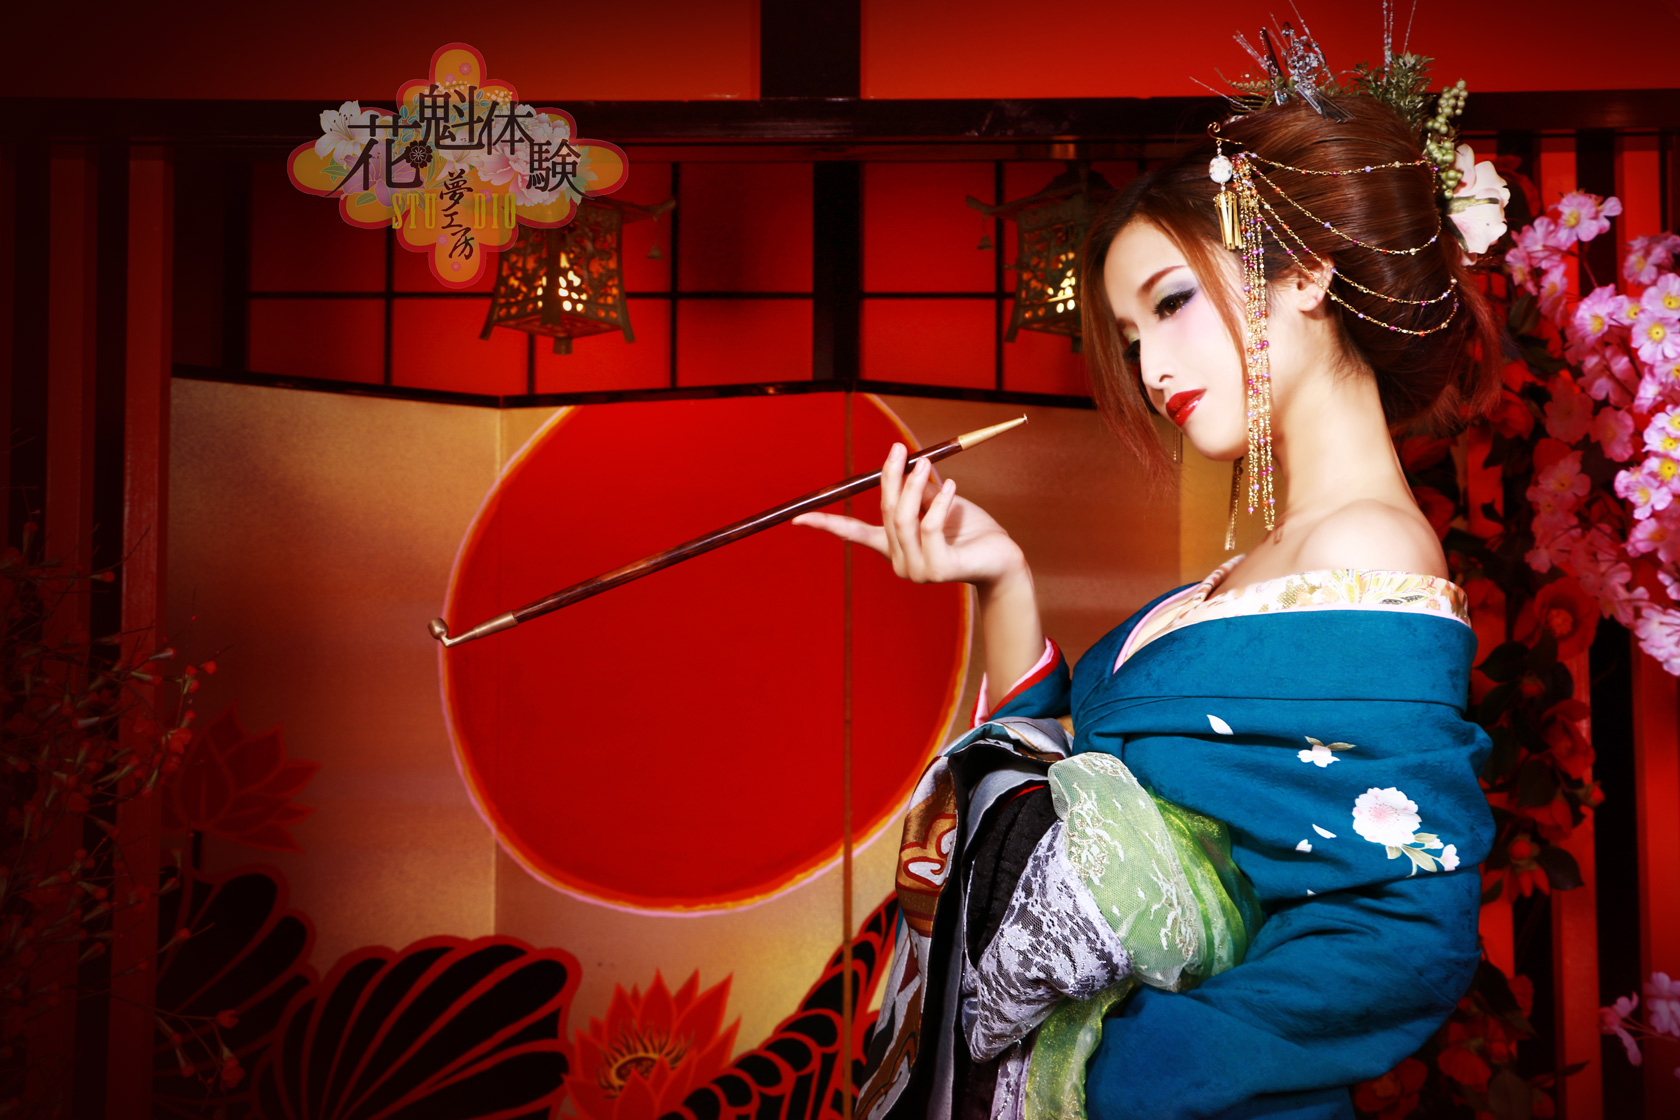 Oiran Makeover Photo Plan: Mixing Traditional and Modern Aesthetics